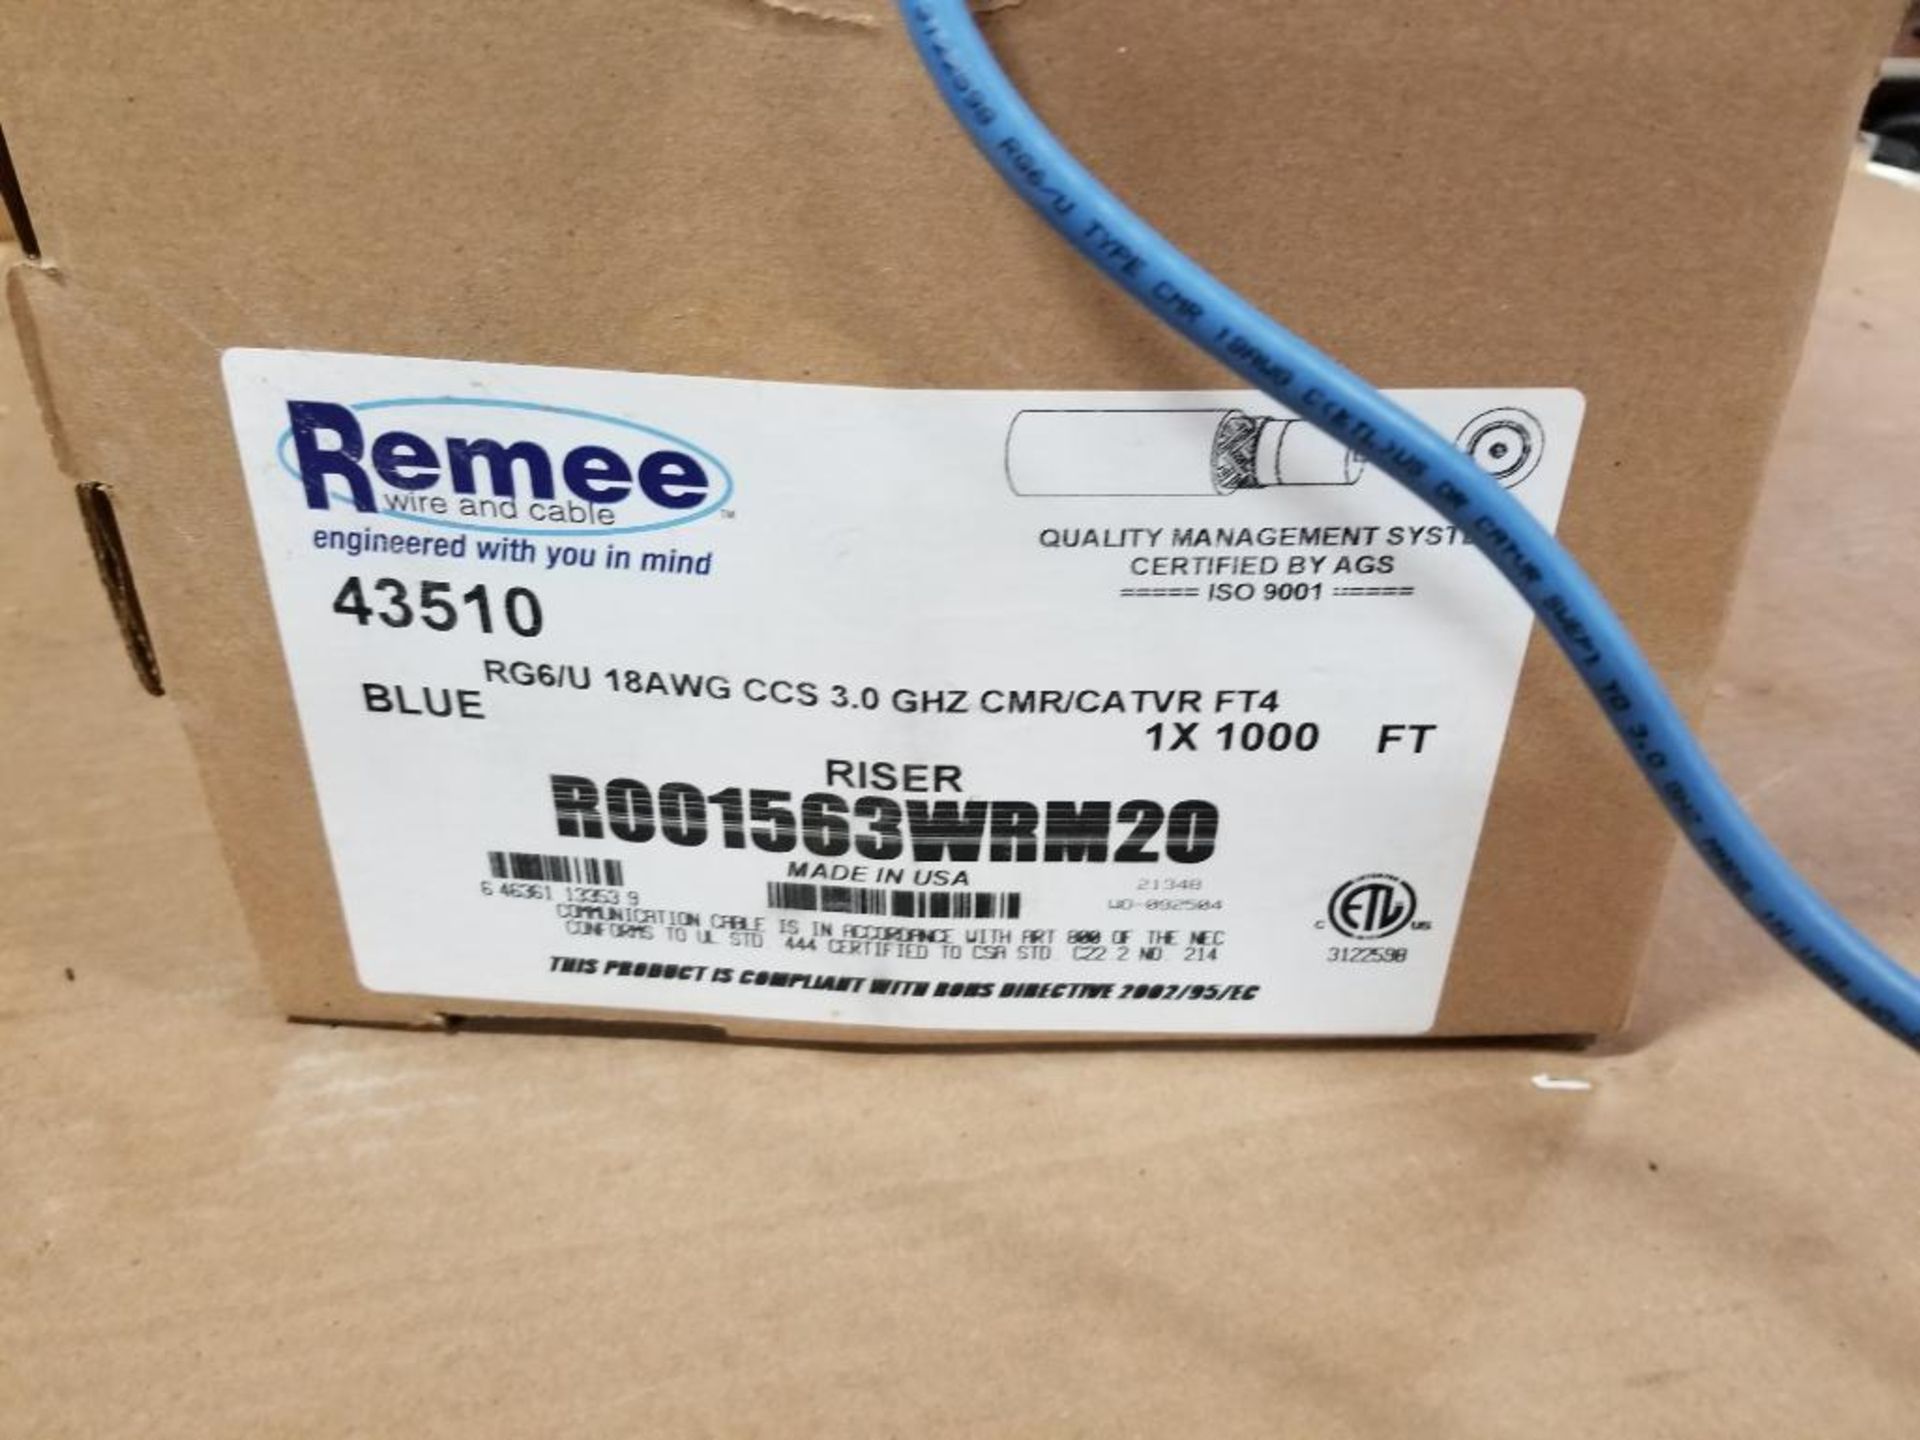 Qty 2 - Remee R001563WRM20 wire and cable. RG6/U 18AWG CCS 3.0 GHz CMR/CATVR FT4. 1000ft per box. - Image 2 of 2